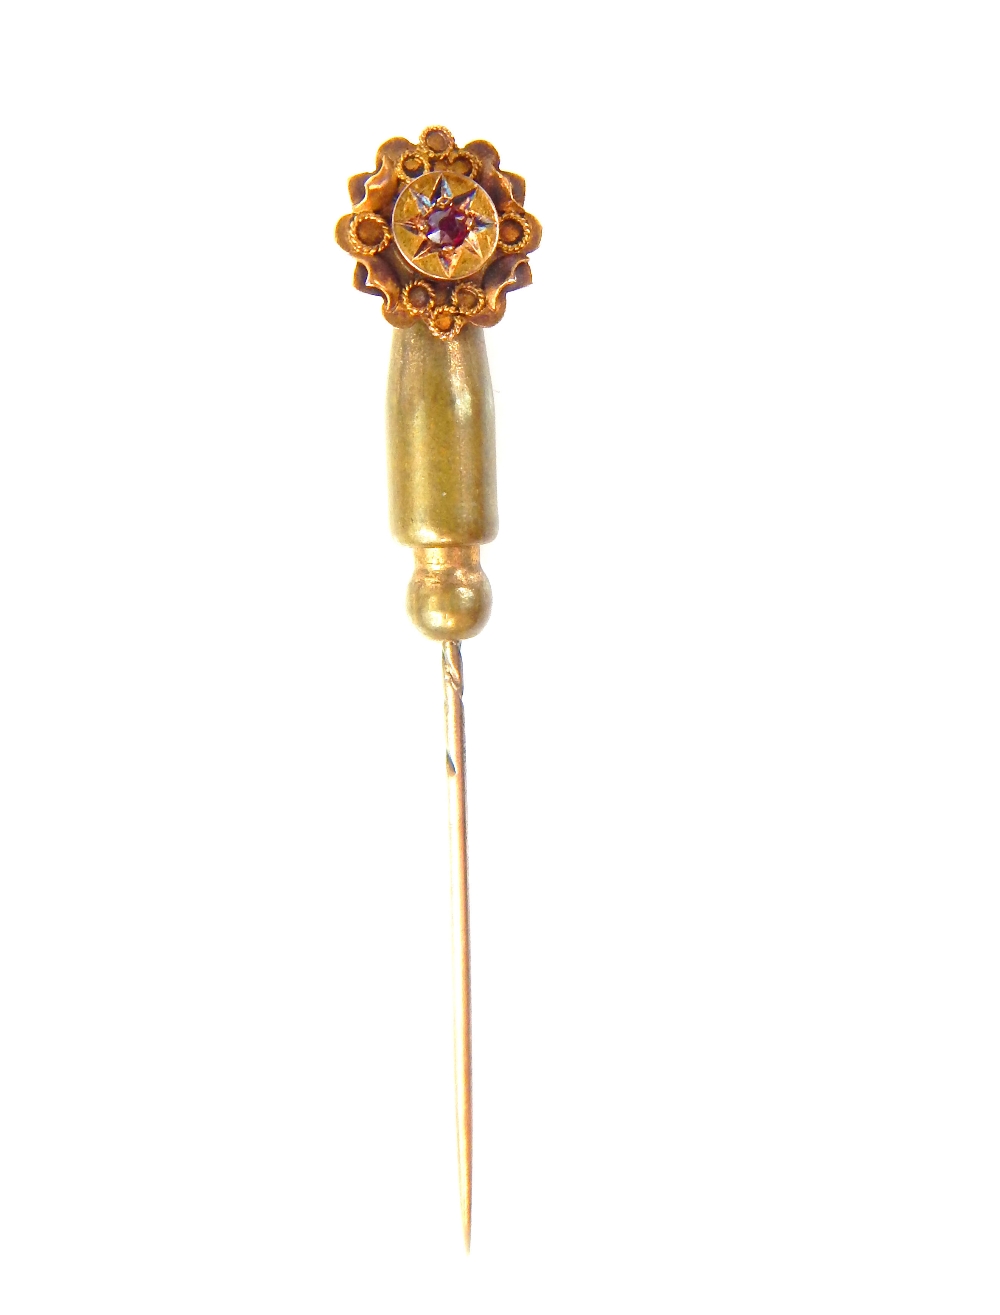 A yellow metal and ruby tie pin - Image 8 of 12